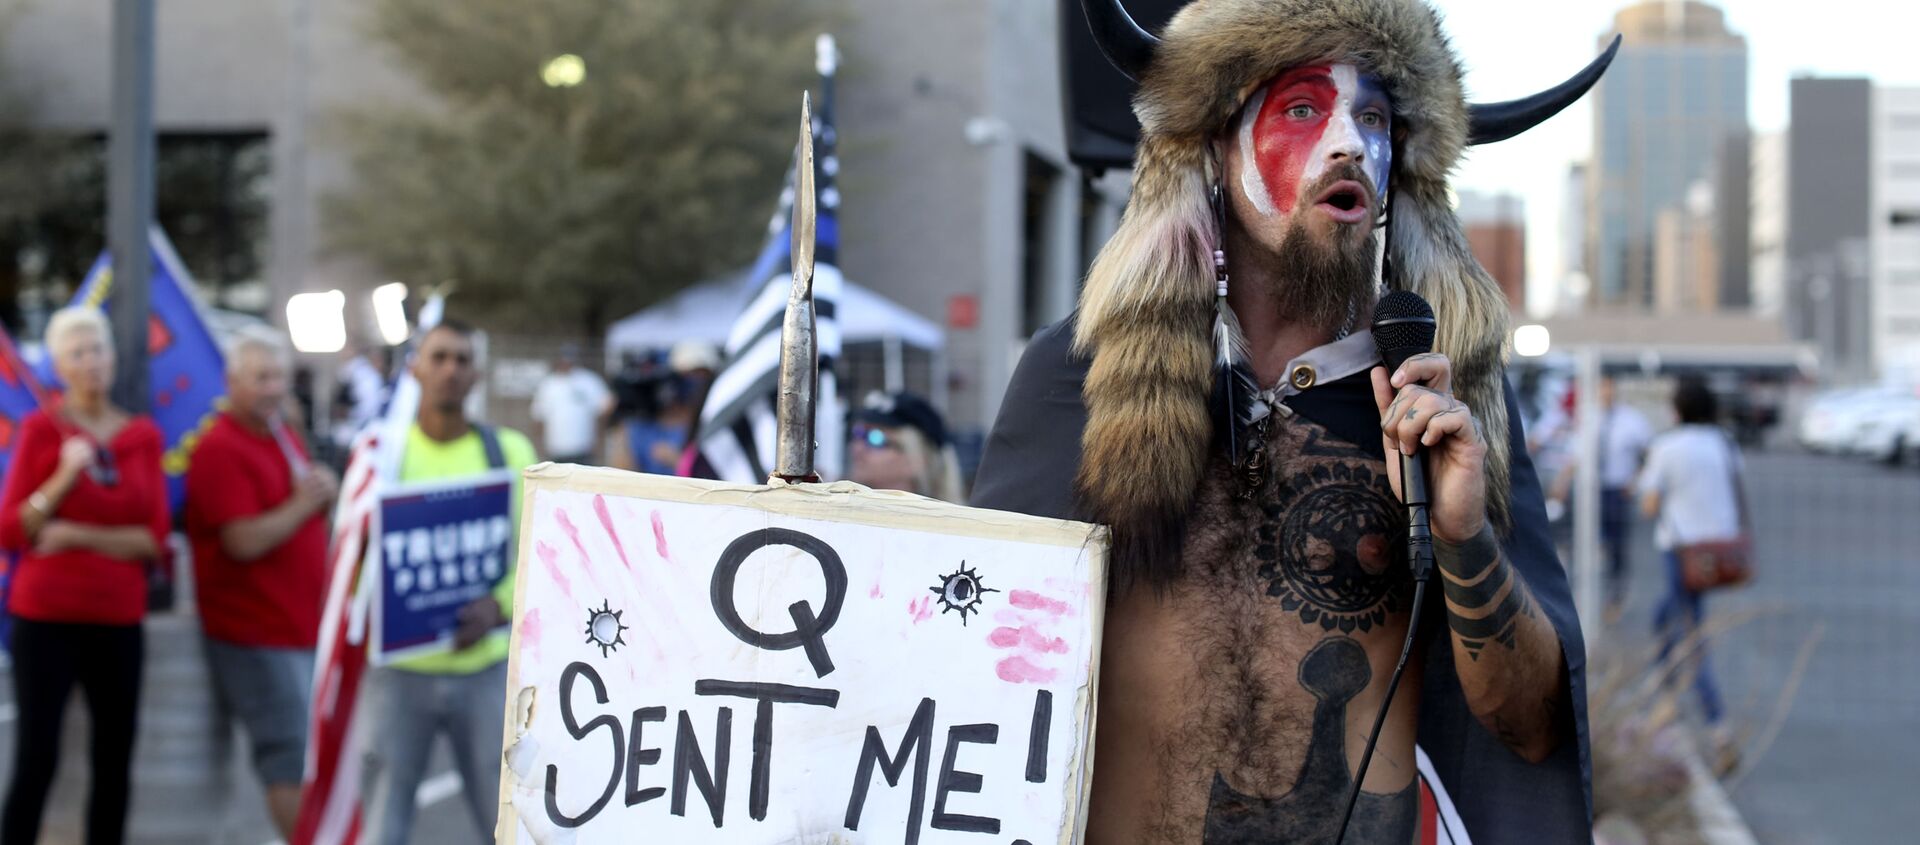 A Qanon believer speaks to a crowd of President Donald Trump supporters outside of the Maricopa County Recorder's Office where votes in the general election are being counted, in Phoenix, Thursday, Nov. 5, 2020. - 俄羅斯衛星通訊社, 1920, 09.01.2021